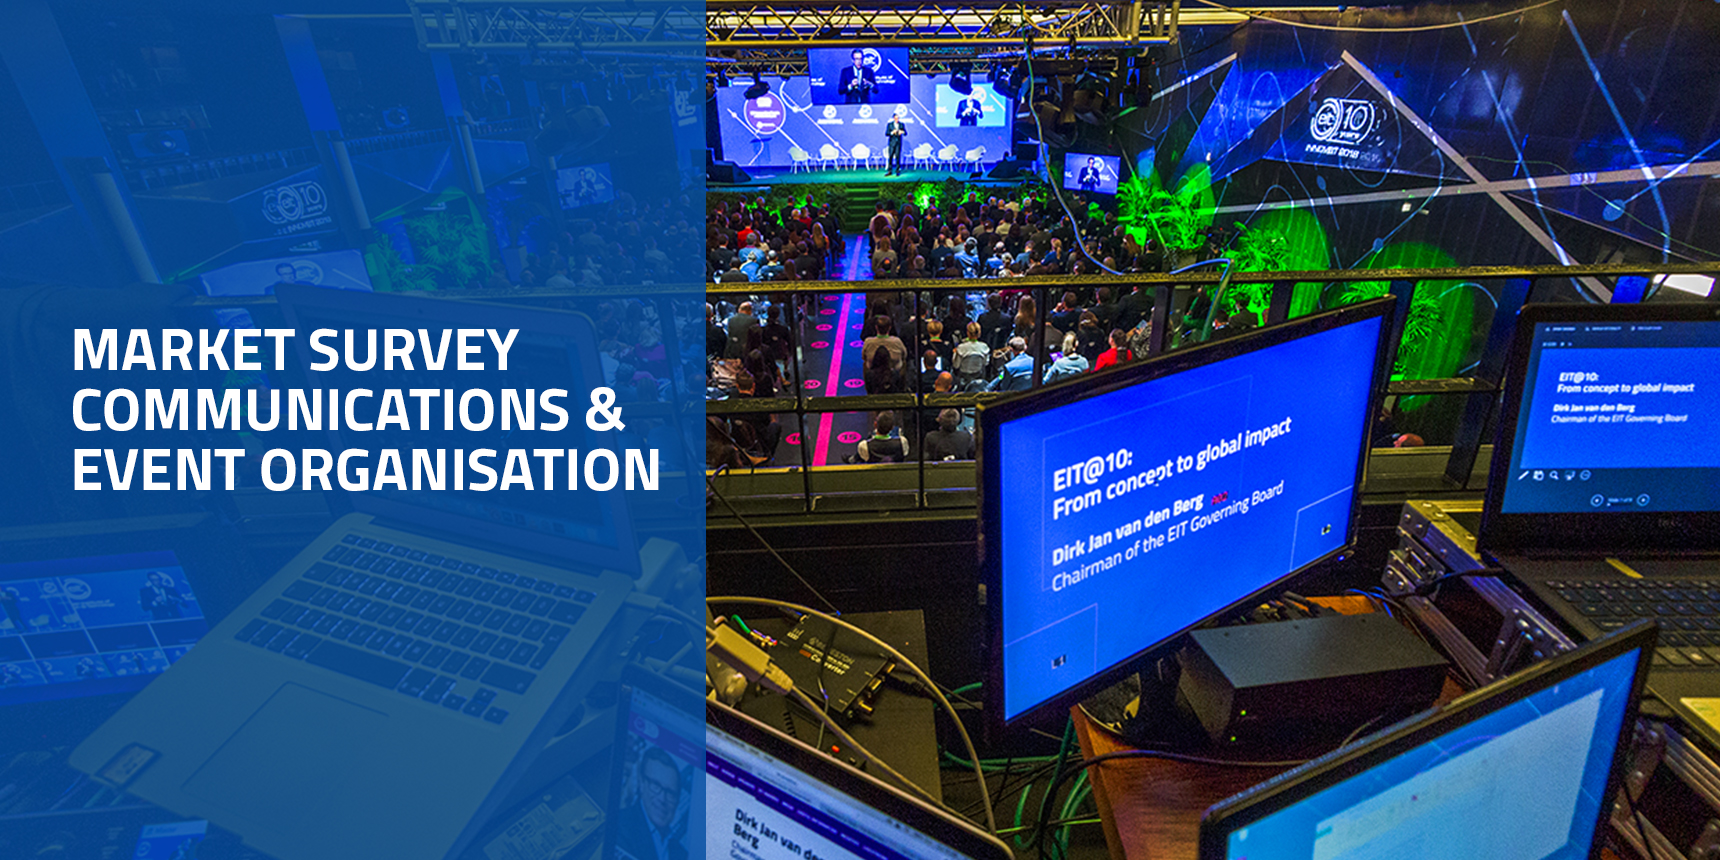 Market survey launched: Communications and event organisation services